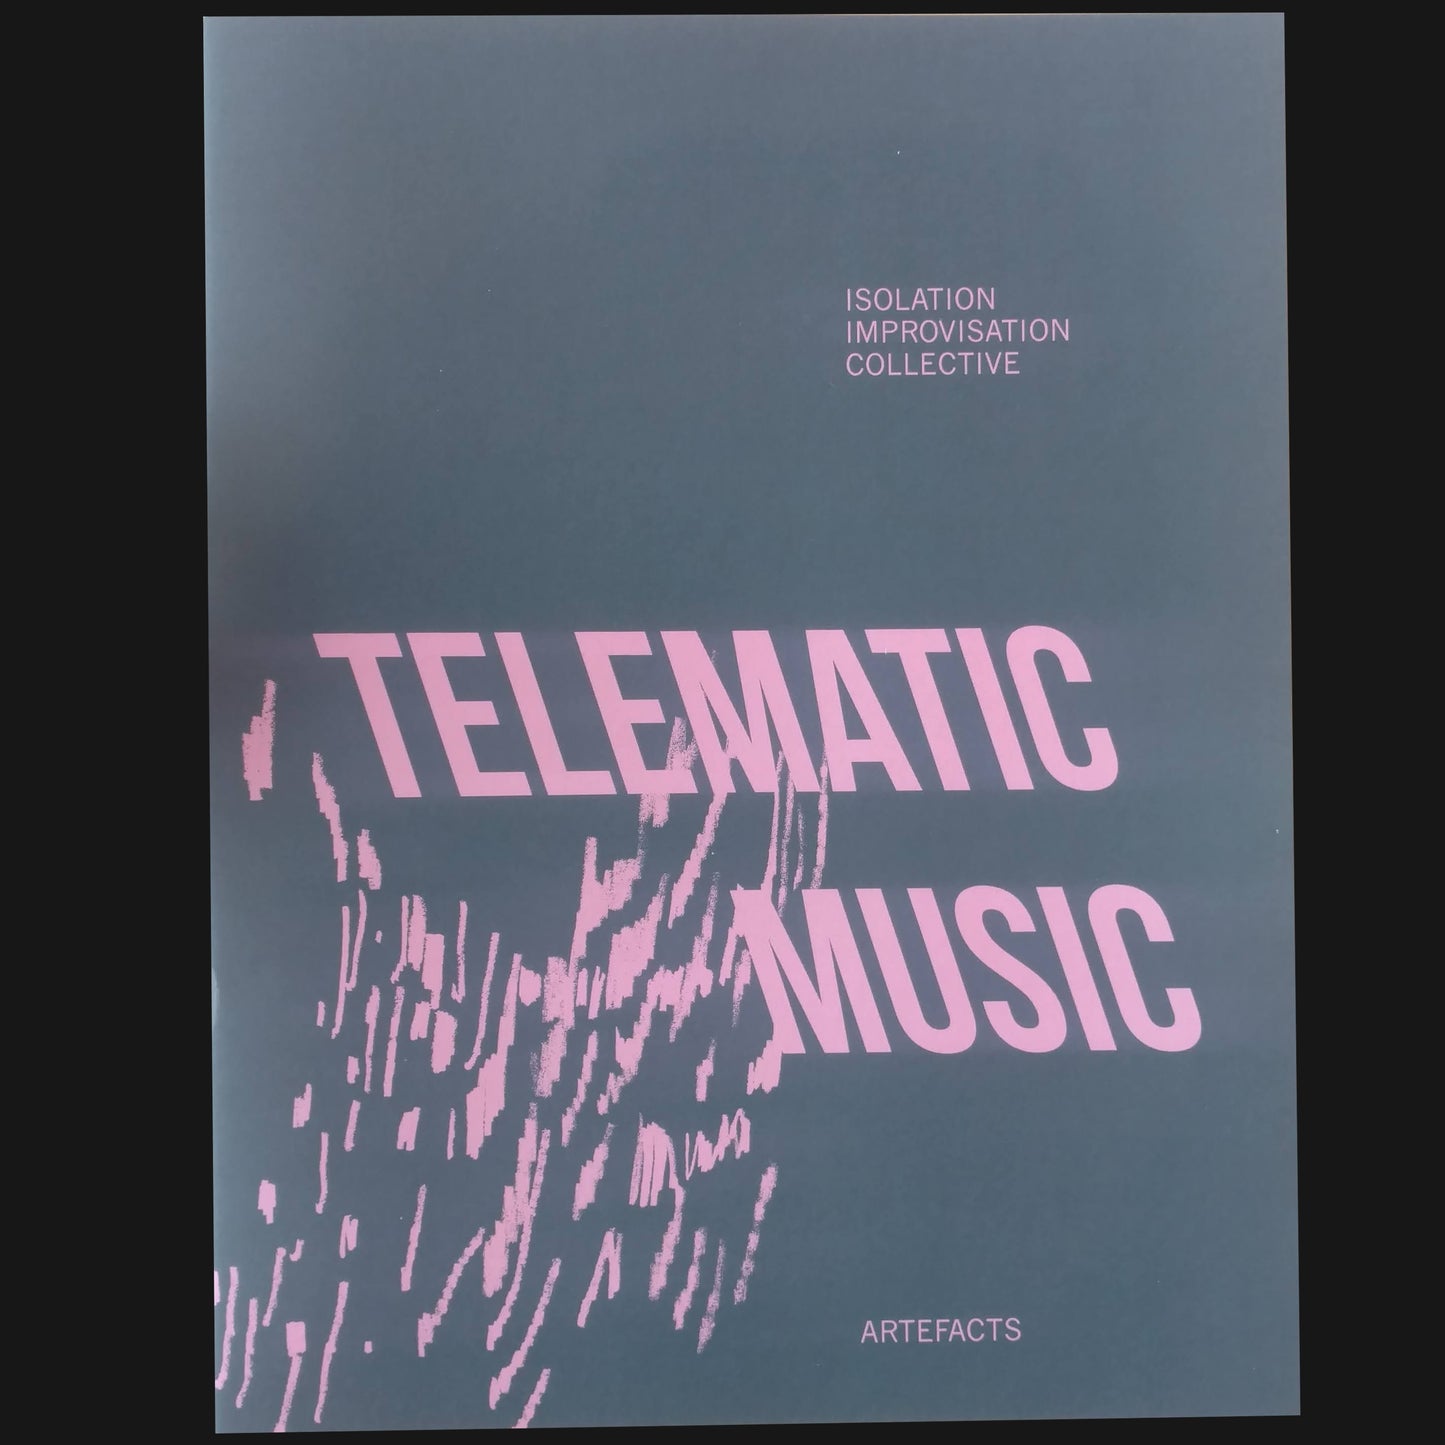 ISOLATION IMPROVISATION COLLECTIVE - "TELEMATIC MUSIC" BOOK/DL